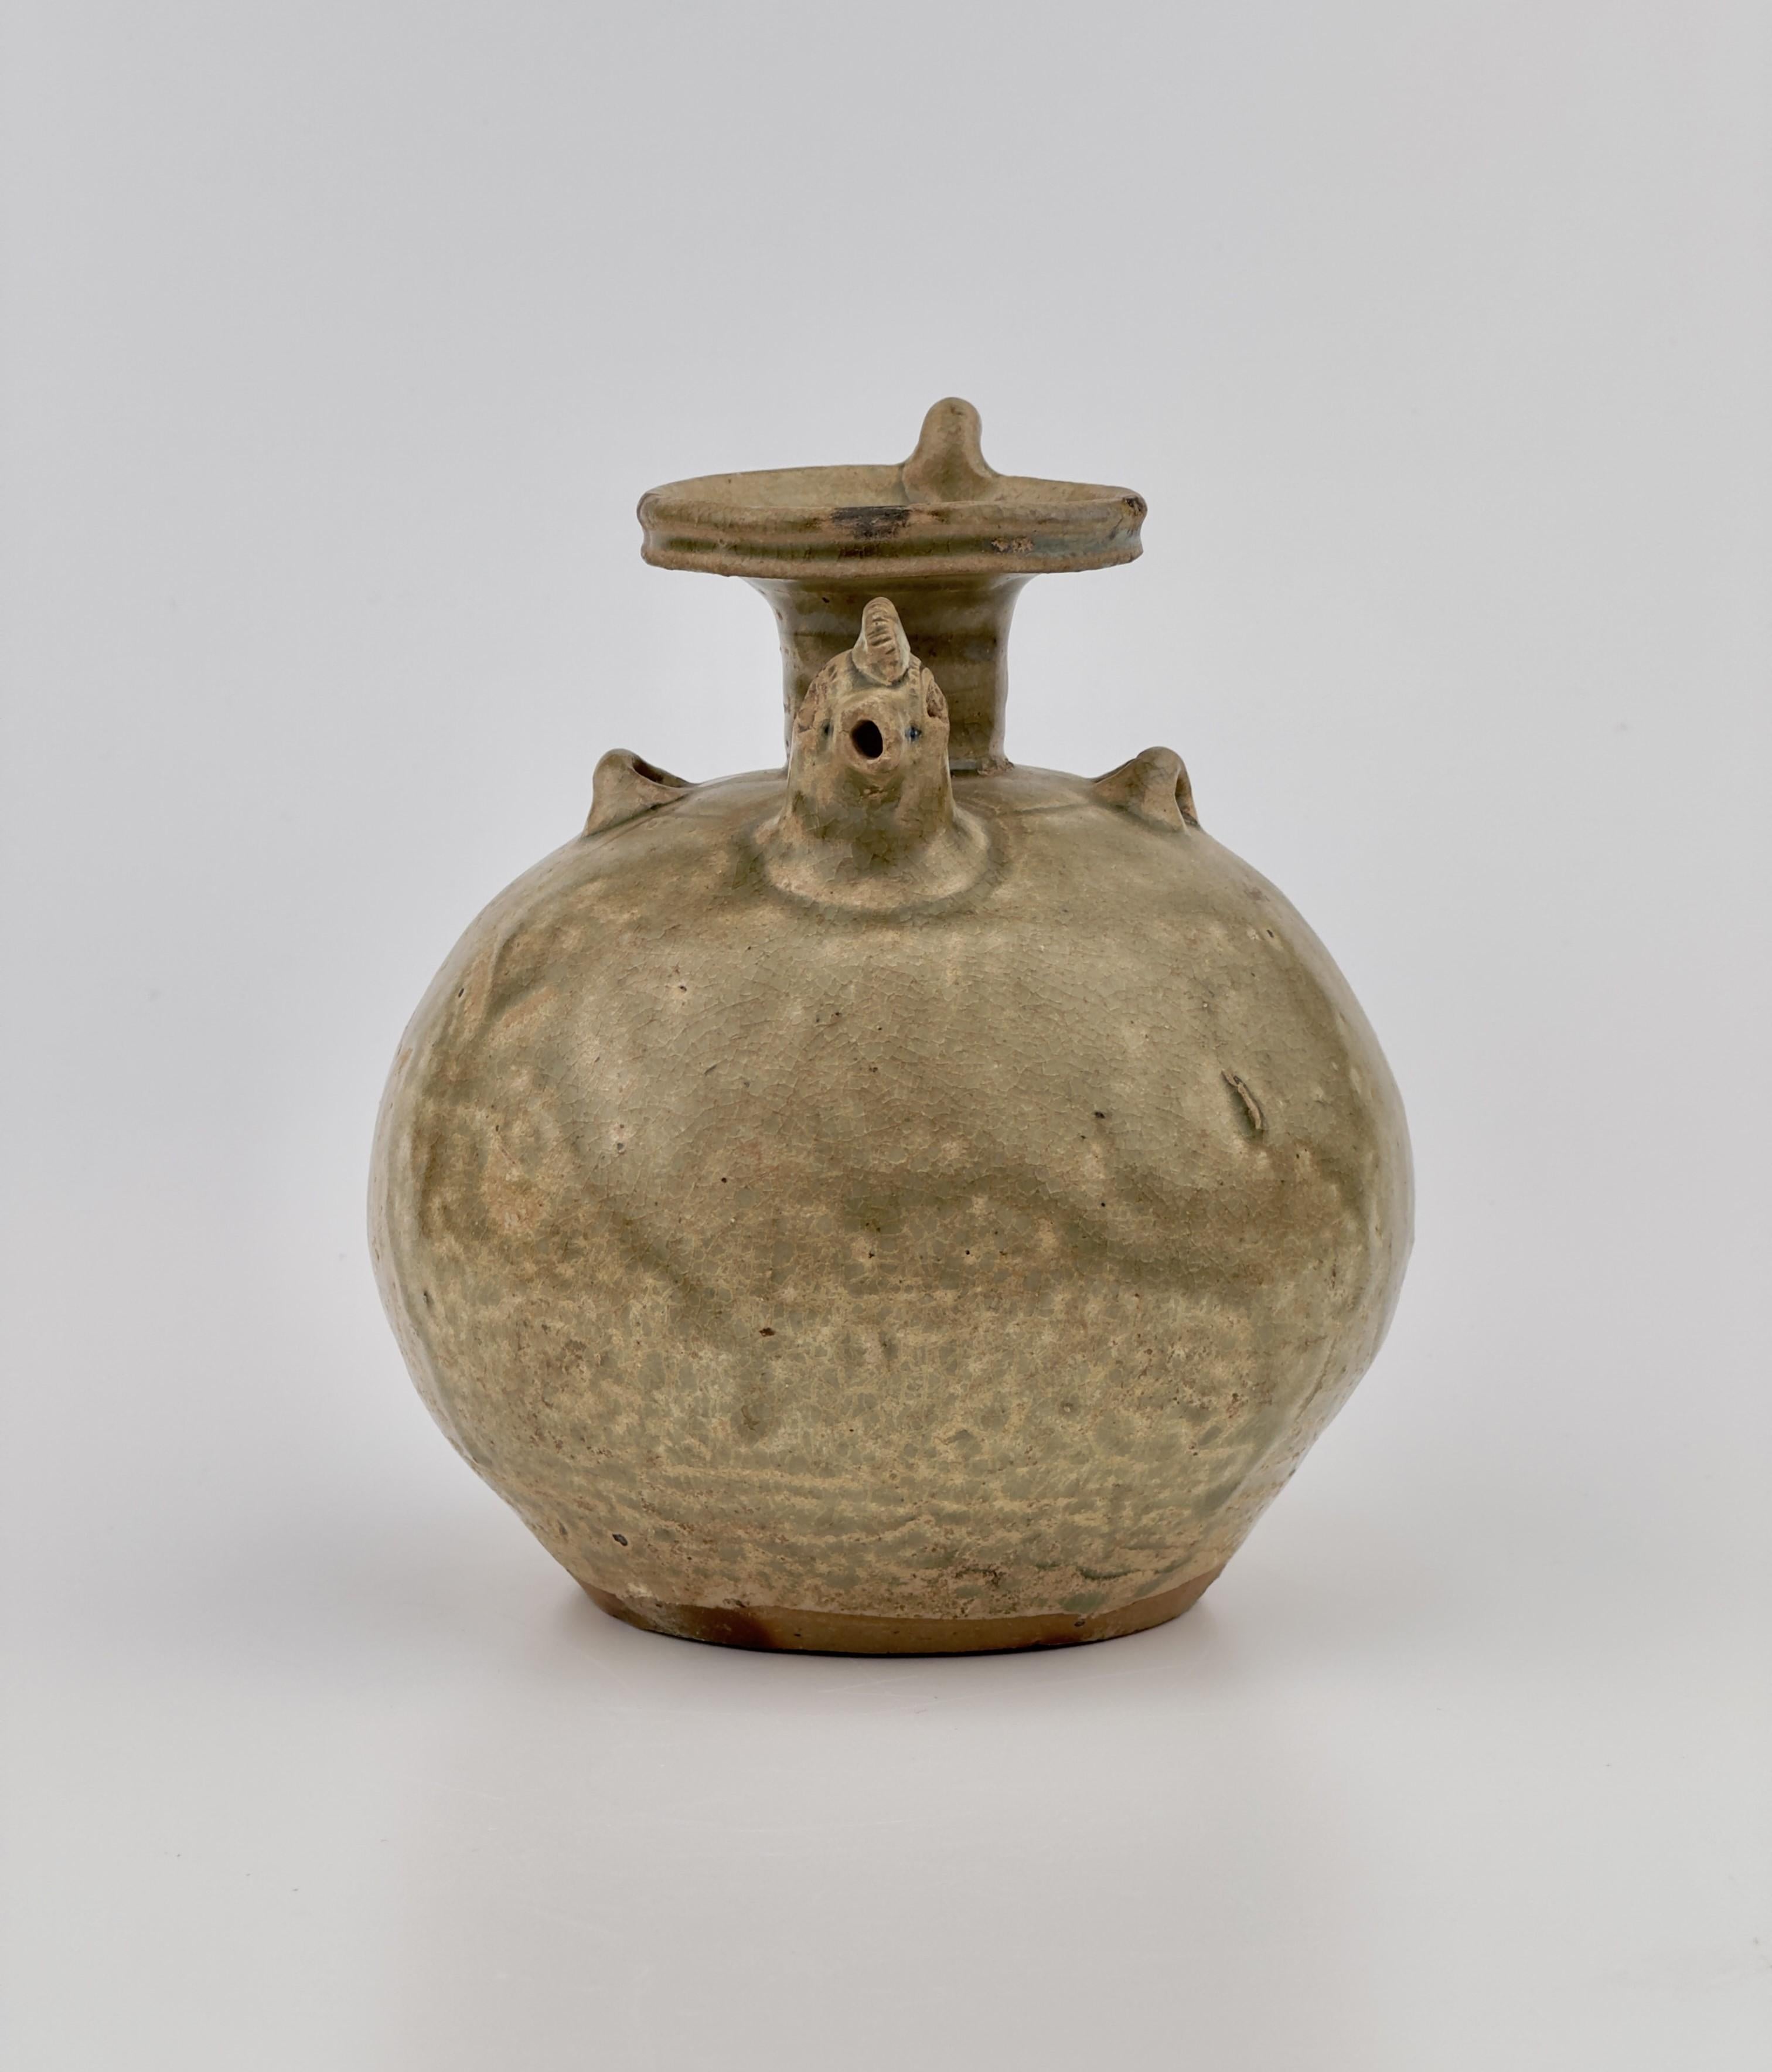 Chicken-head ewers are among the most distinct and emblematic pottery pieces from the dynamic yet innovative era spanning from the Han (206 BC - AD 220) to the Tang (618~907) dynasties. Their production commenced during the Jin dynasty (265~420) in